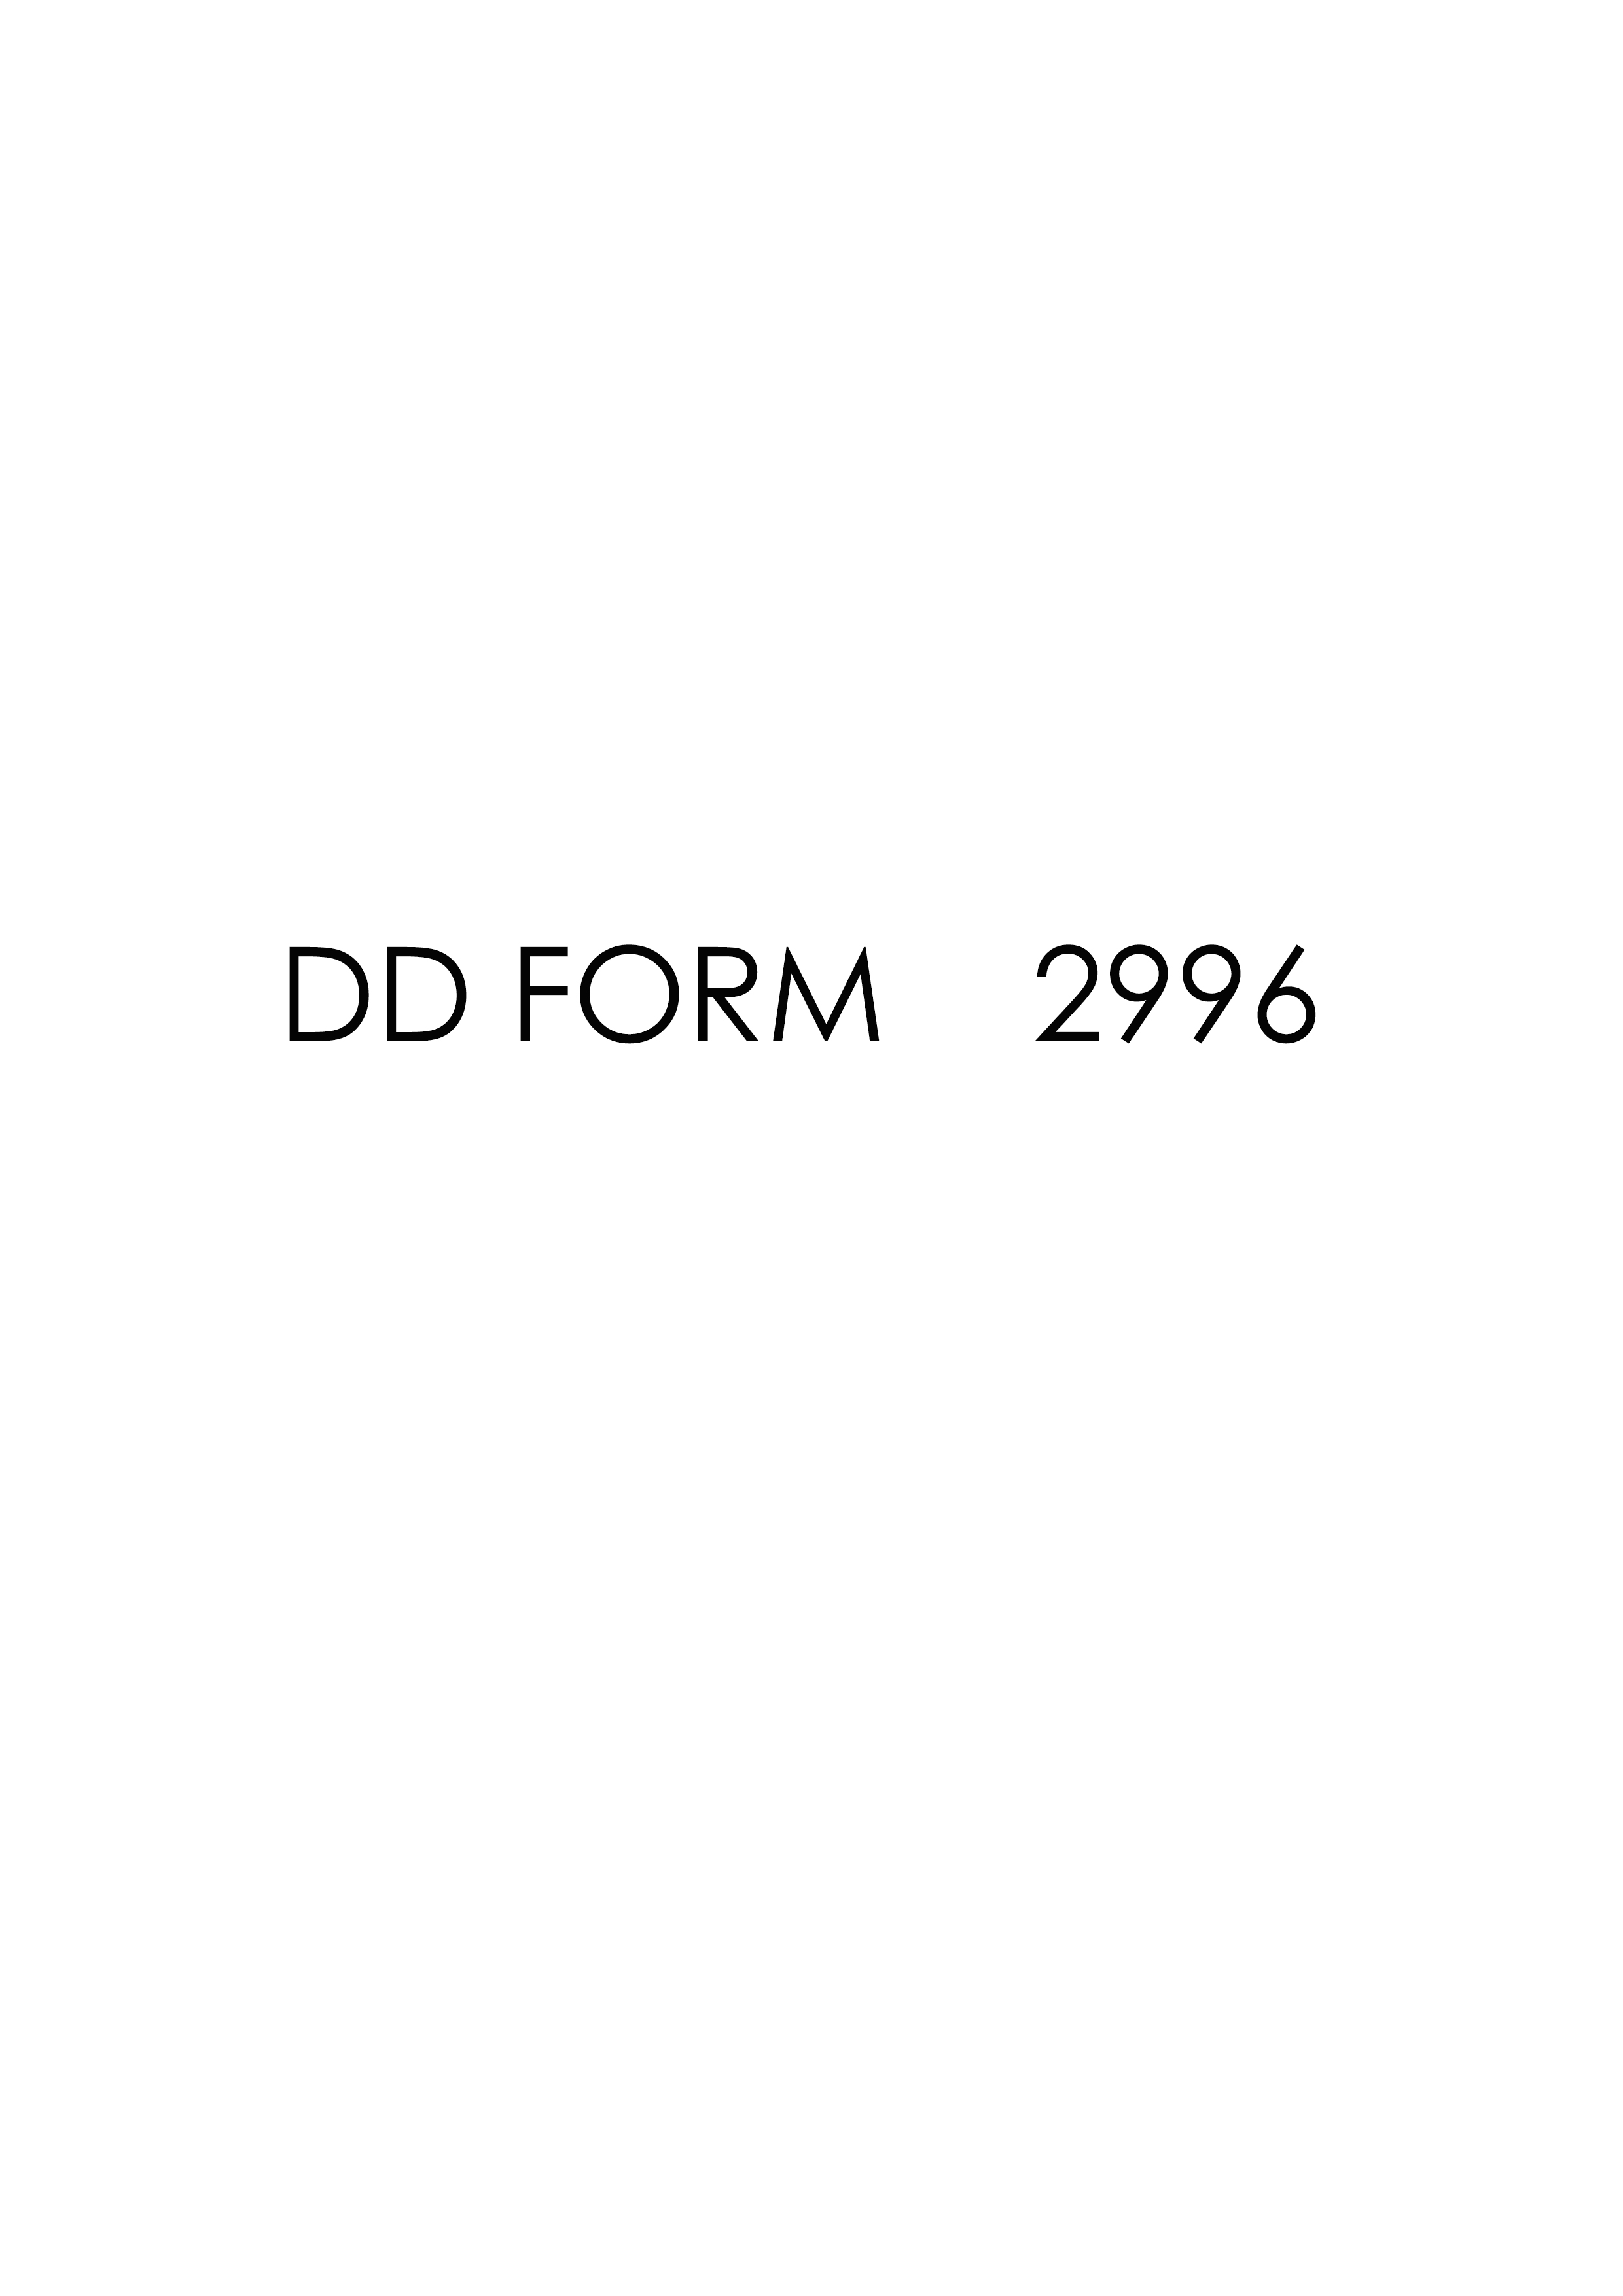 Download Fillable dd Form 2996